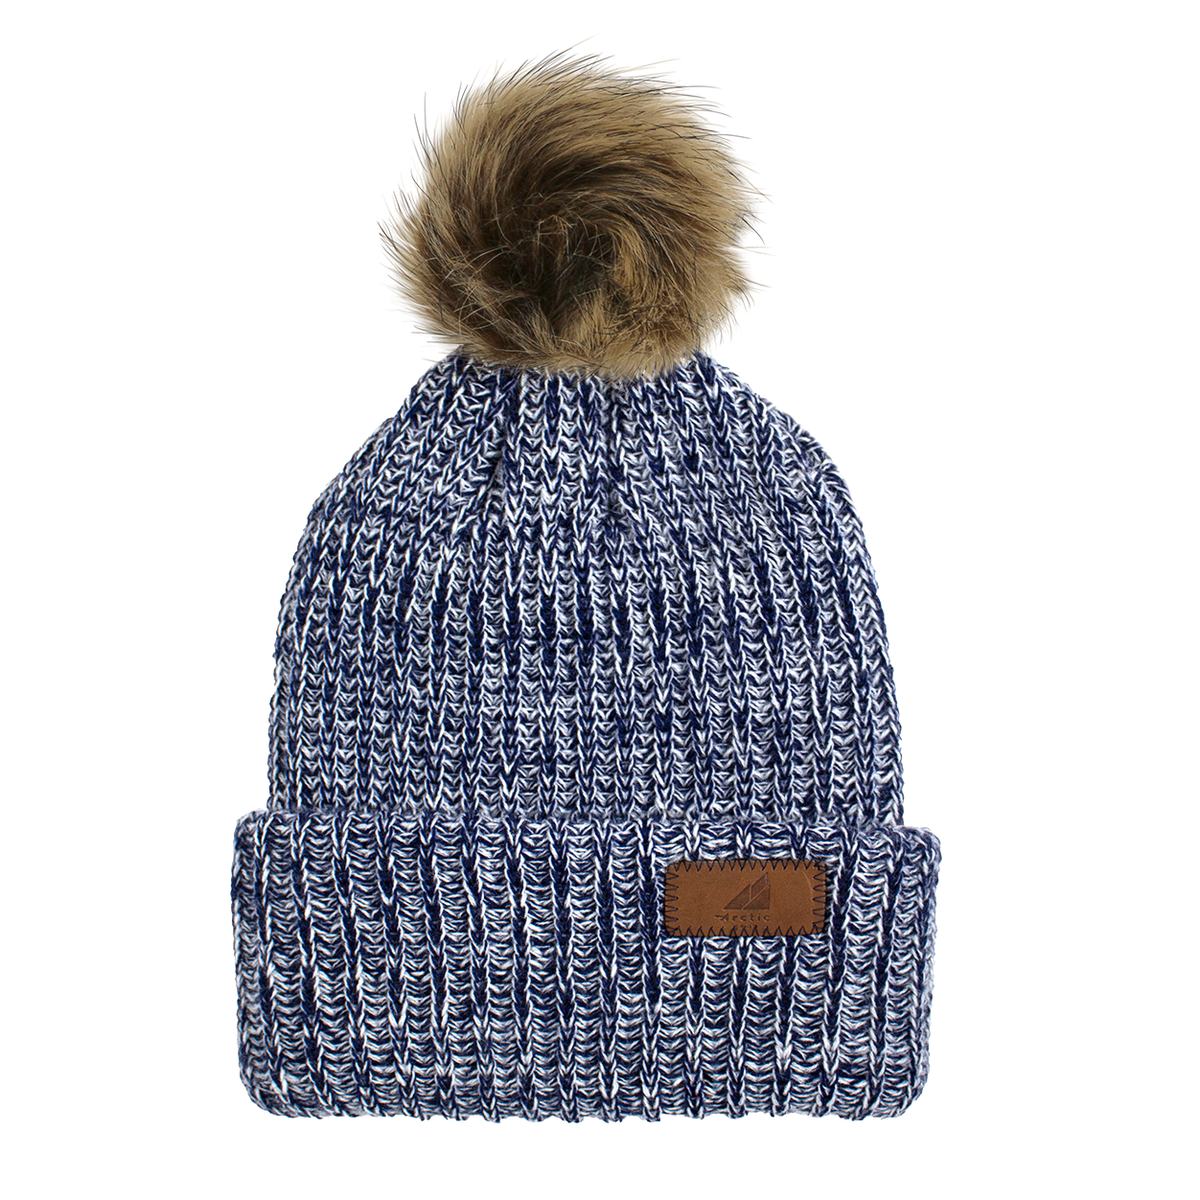 Adult Acrylic Ribbed Cuff Winter Hat with Pom Navy and Natural Blended with Shepard Pom